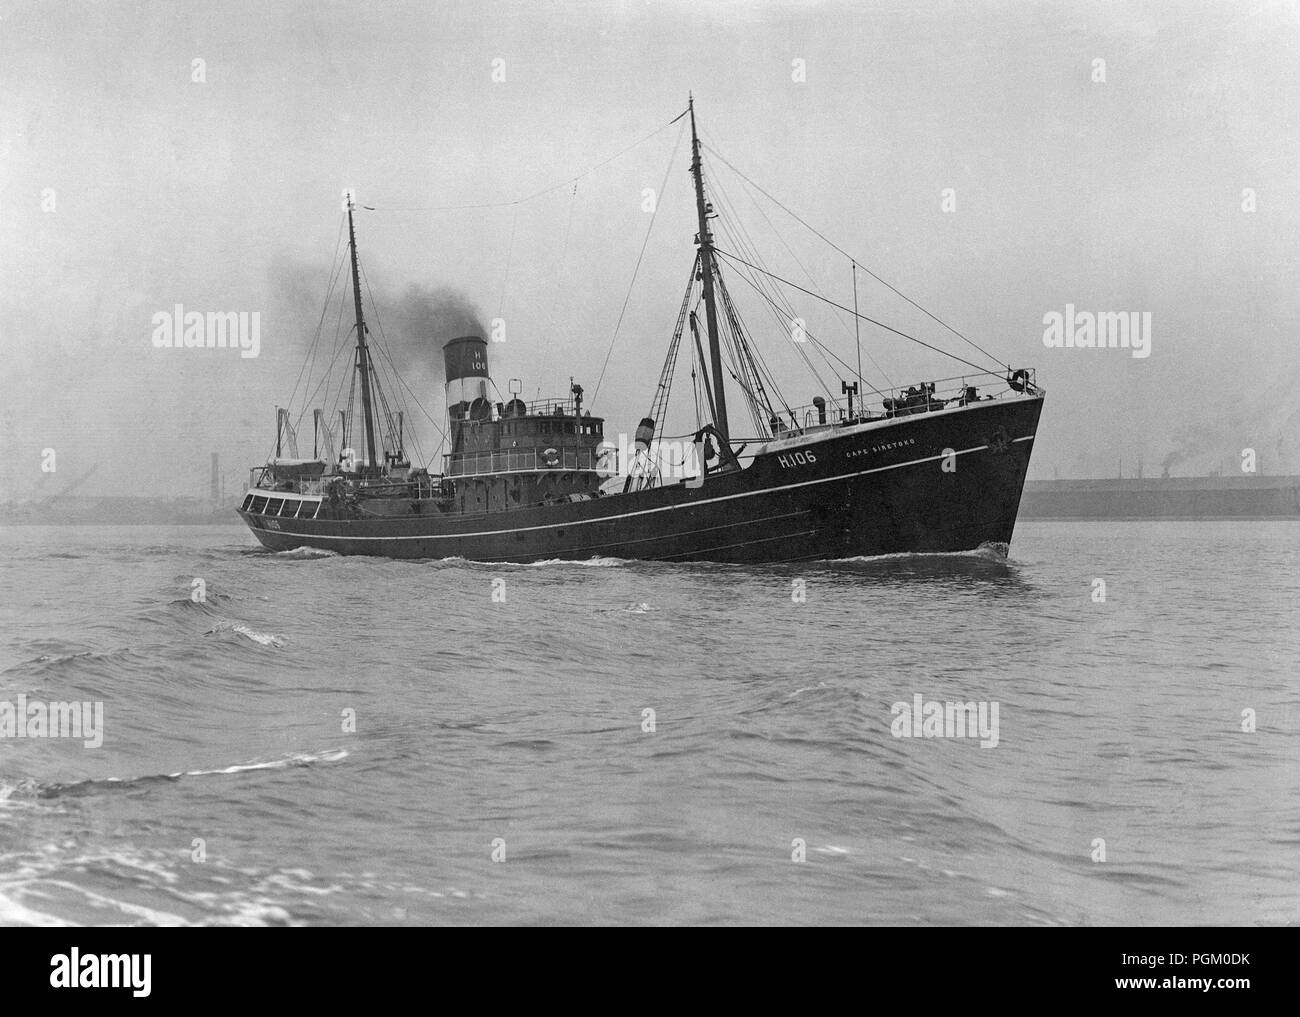 The trawler 'Cape Siretoko', built by Cochrane and Sons (UK) in 1939 and taken over by the UK Admiralty on 18th September 1939. Sunk by German Aircraft in Norway on 29th April 1940. Stock Photo